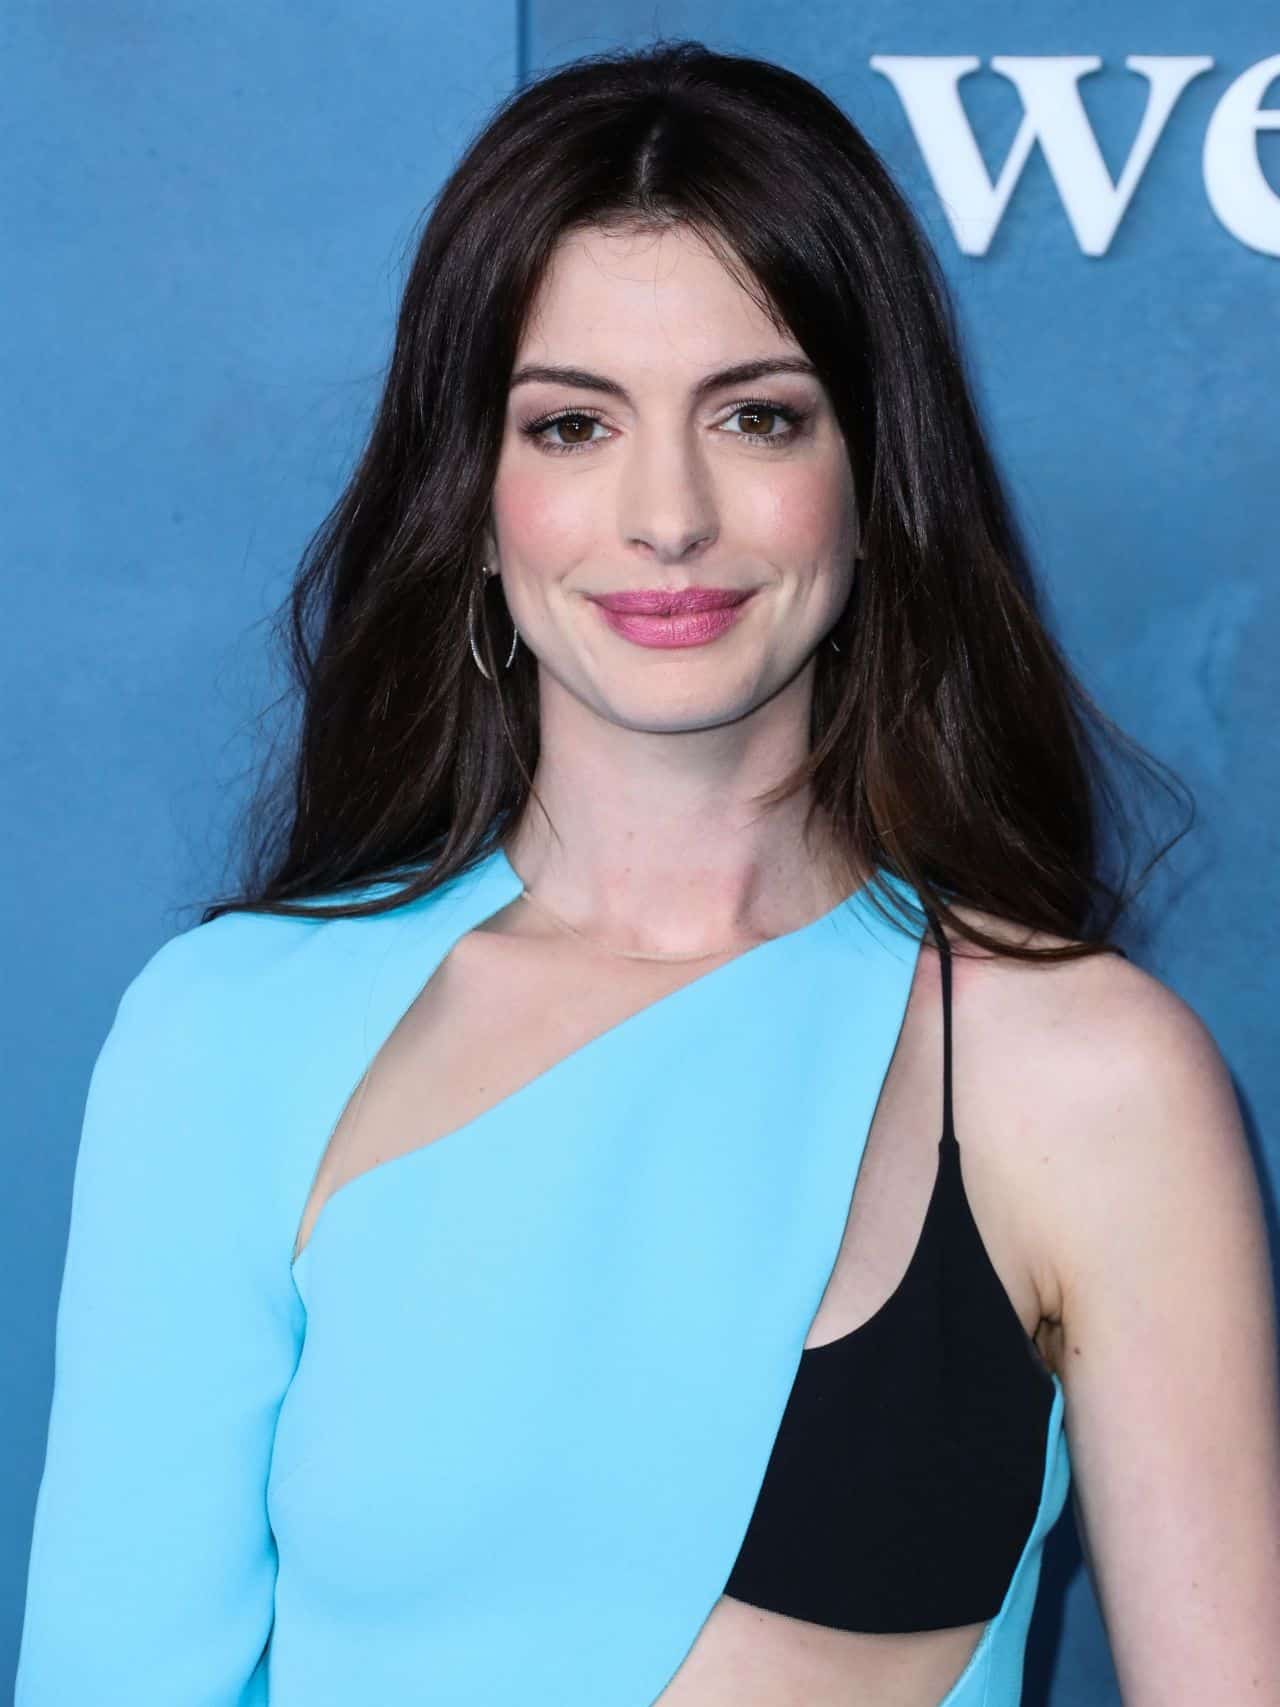 Anne Hathaway Wore a Daring Blue Dress at the WeCrashed Premiere in LA